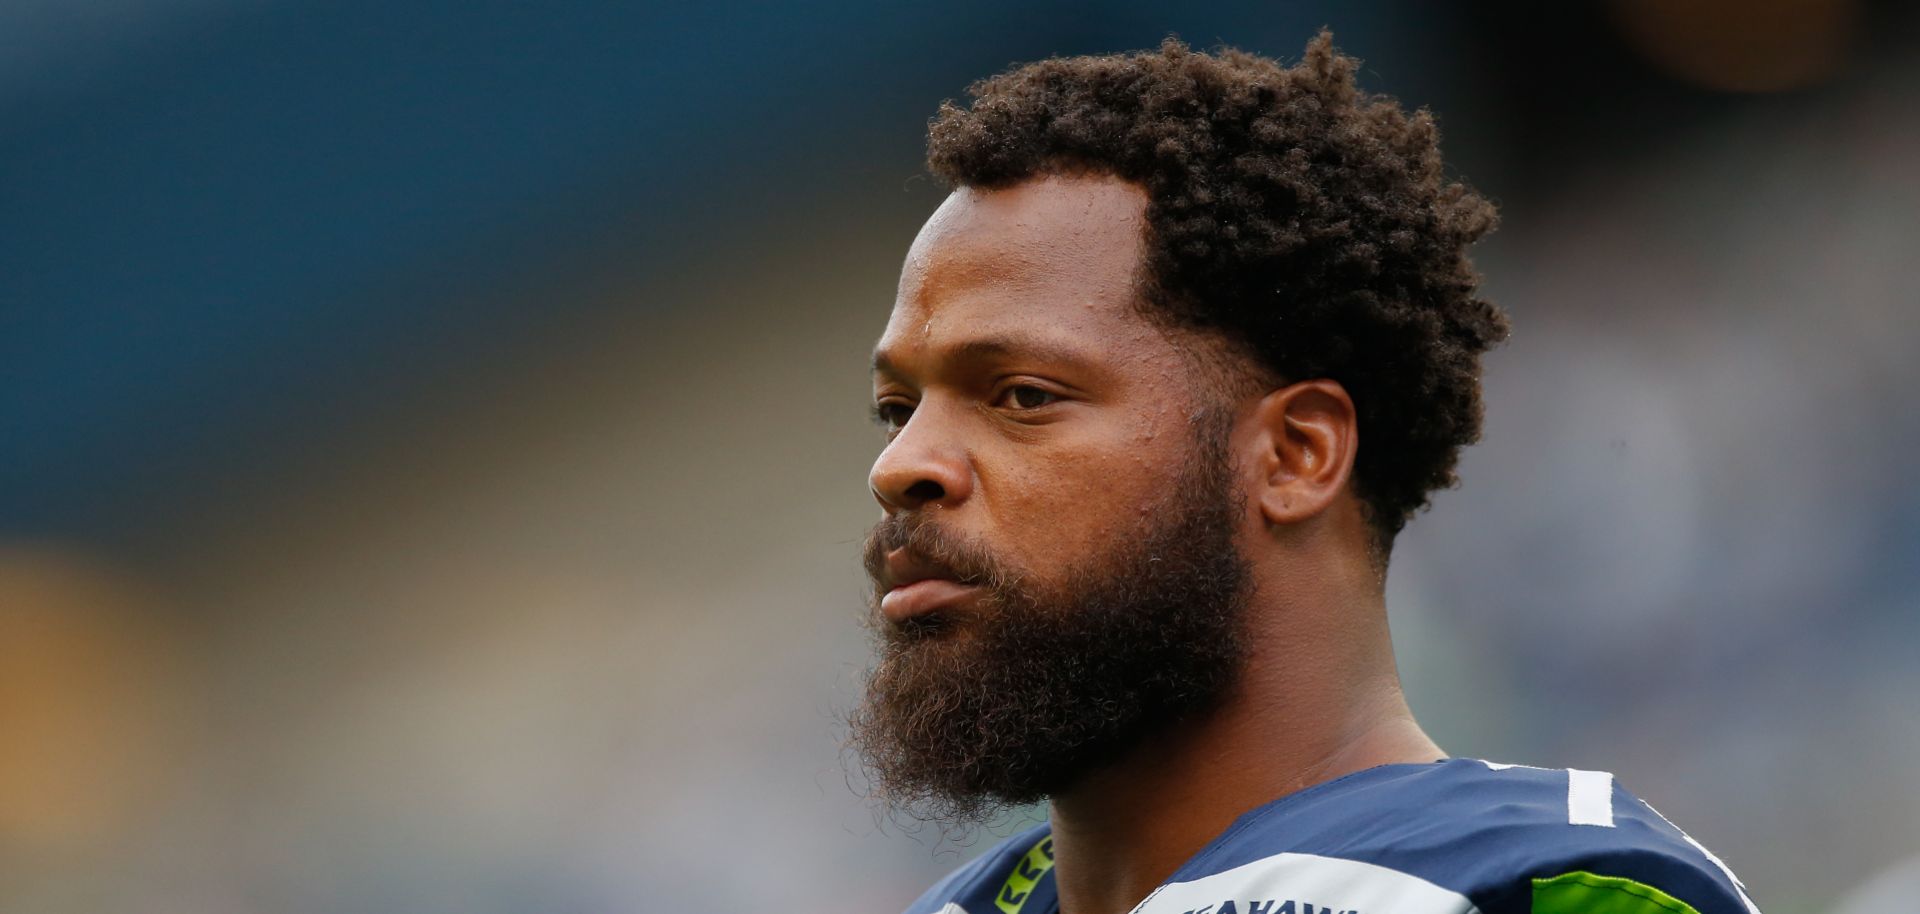 Defensive end Michael Bennett of the Seattle Seahawks looks on prior to the game against the Minnesota Vikings on Aug. 18, 2017, in Seattle, Washington.